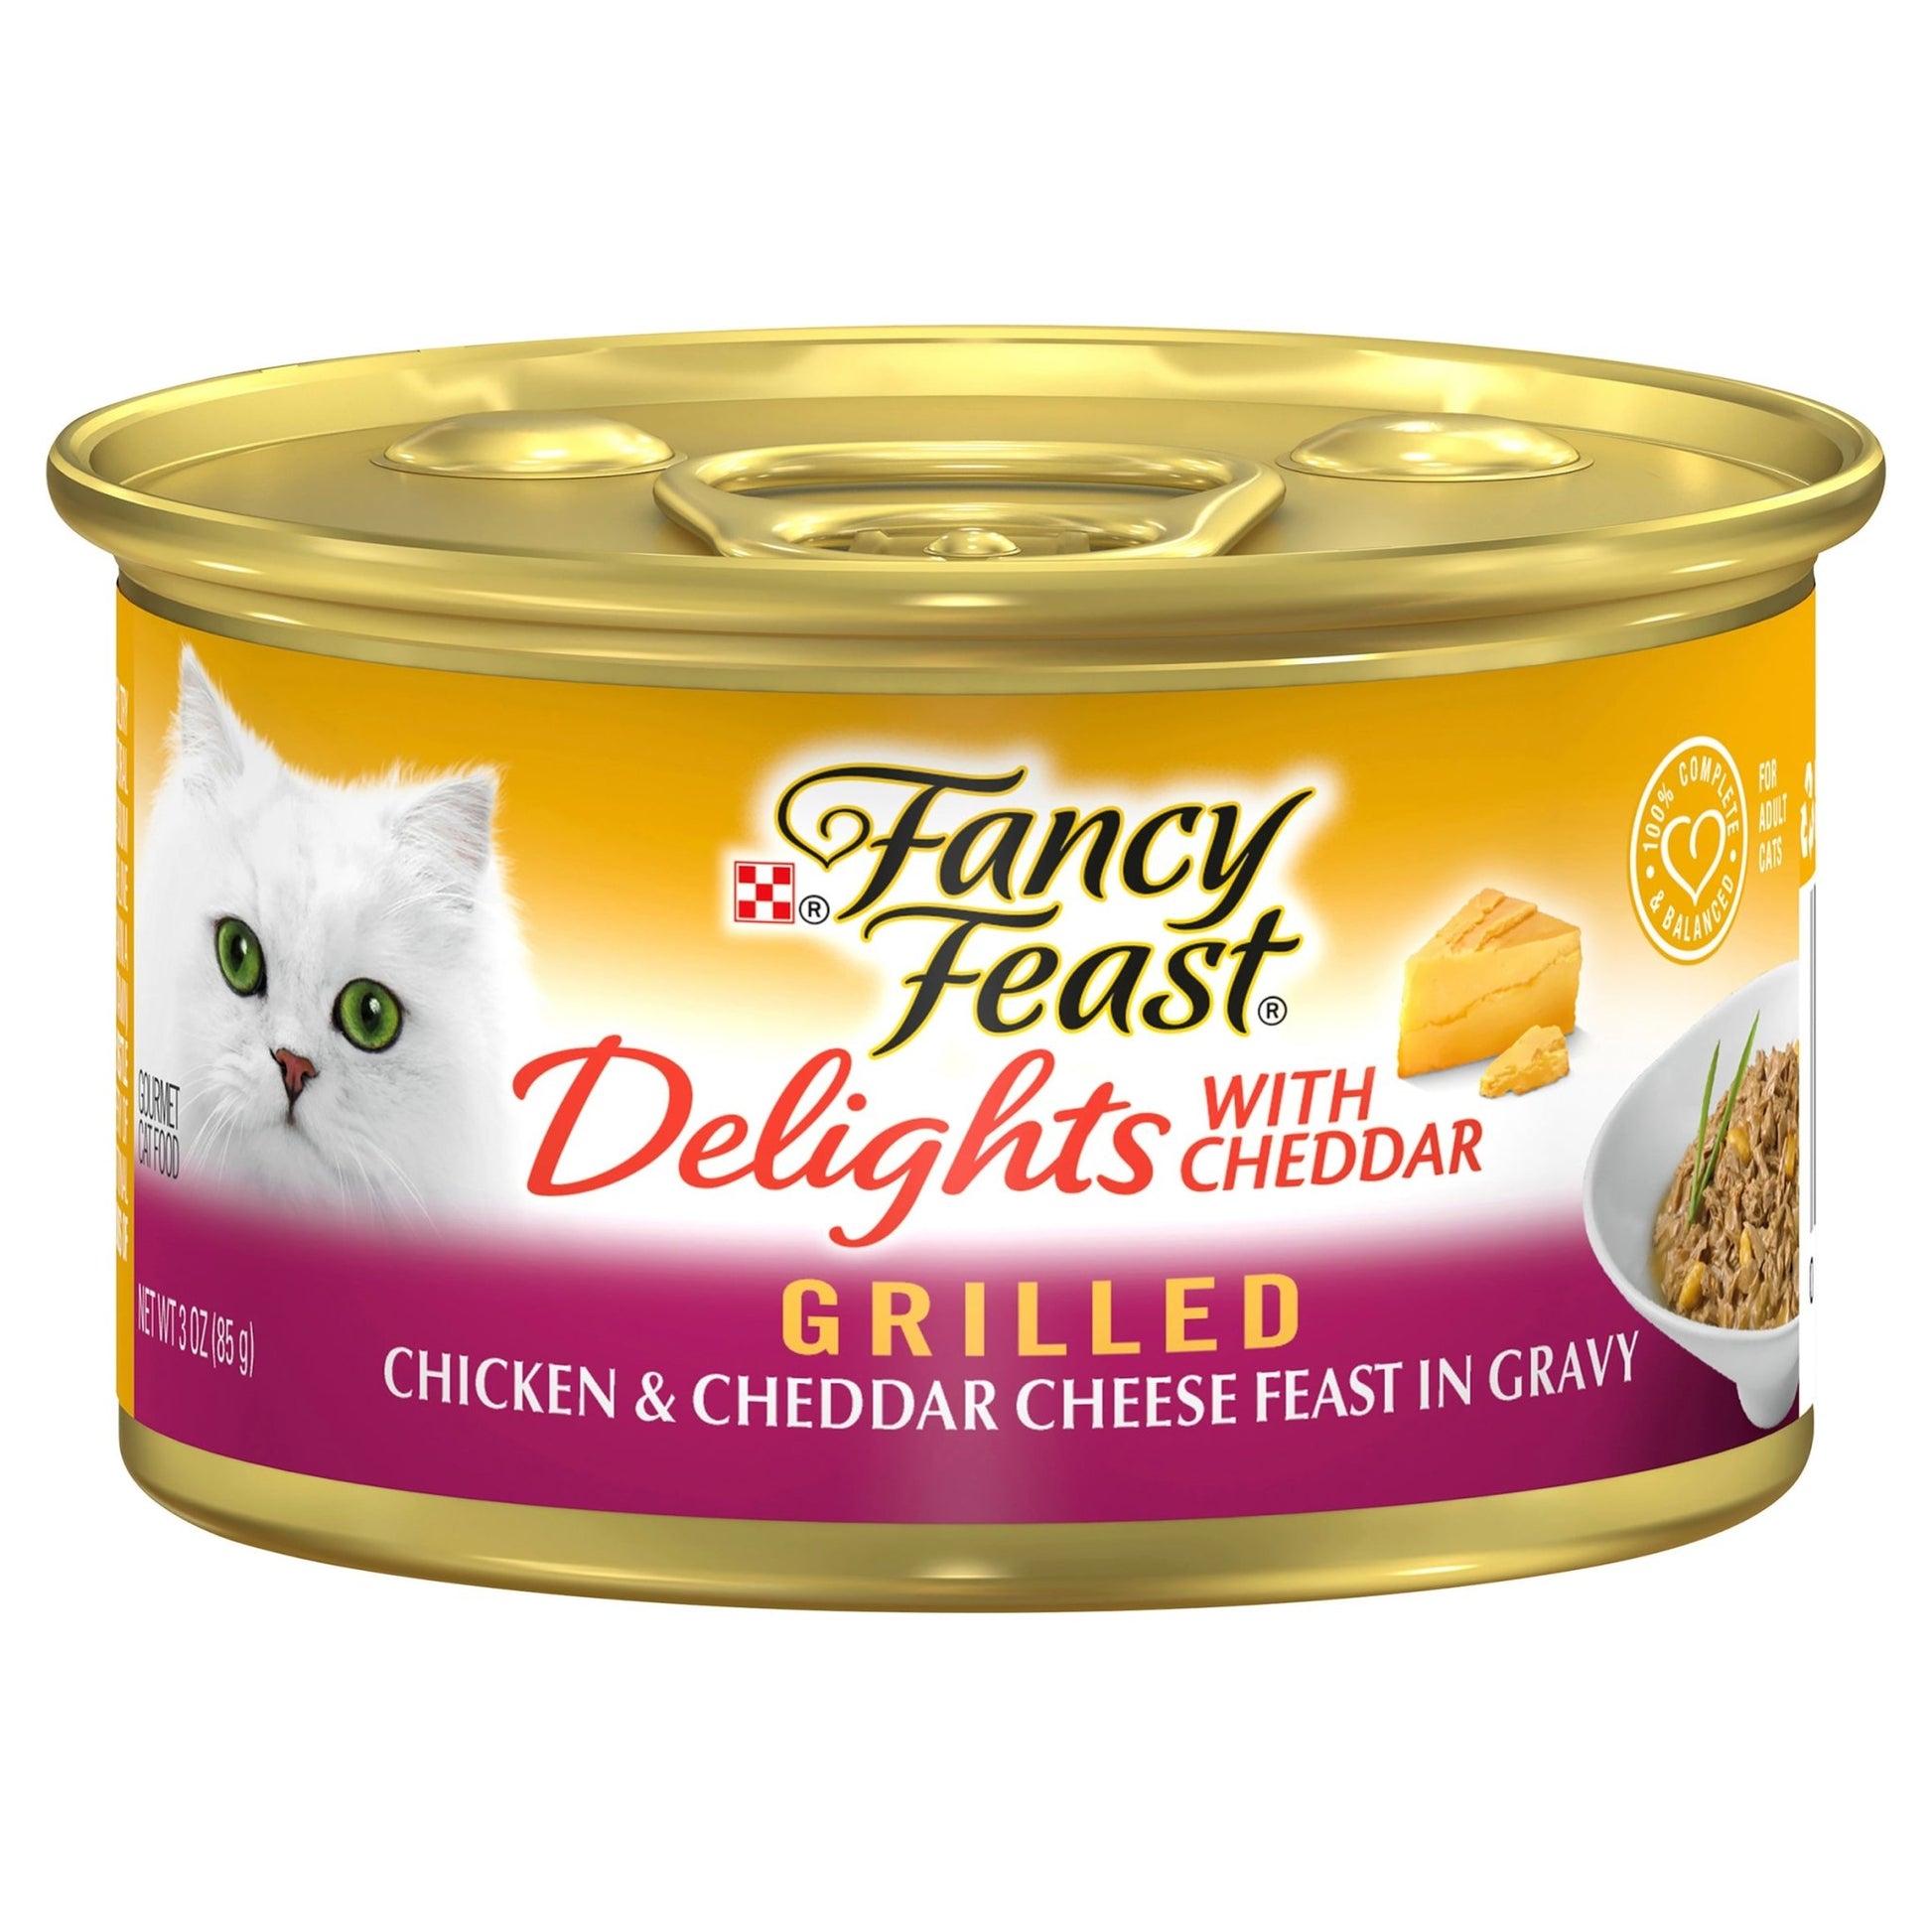 Fancy Feast Delights with Cheddar Grilled Chicken 85g - Woonona Petfood & Produce